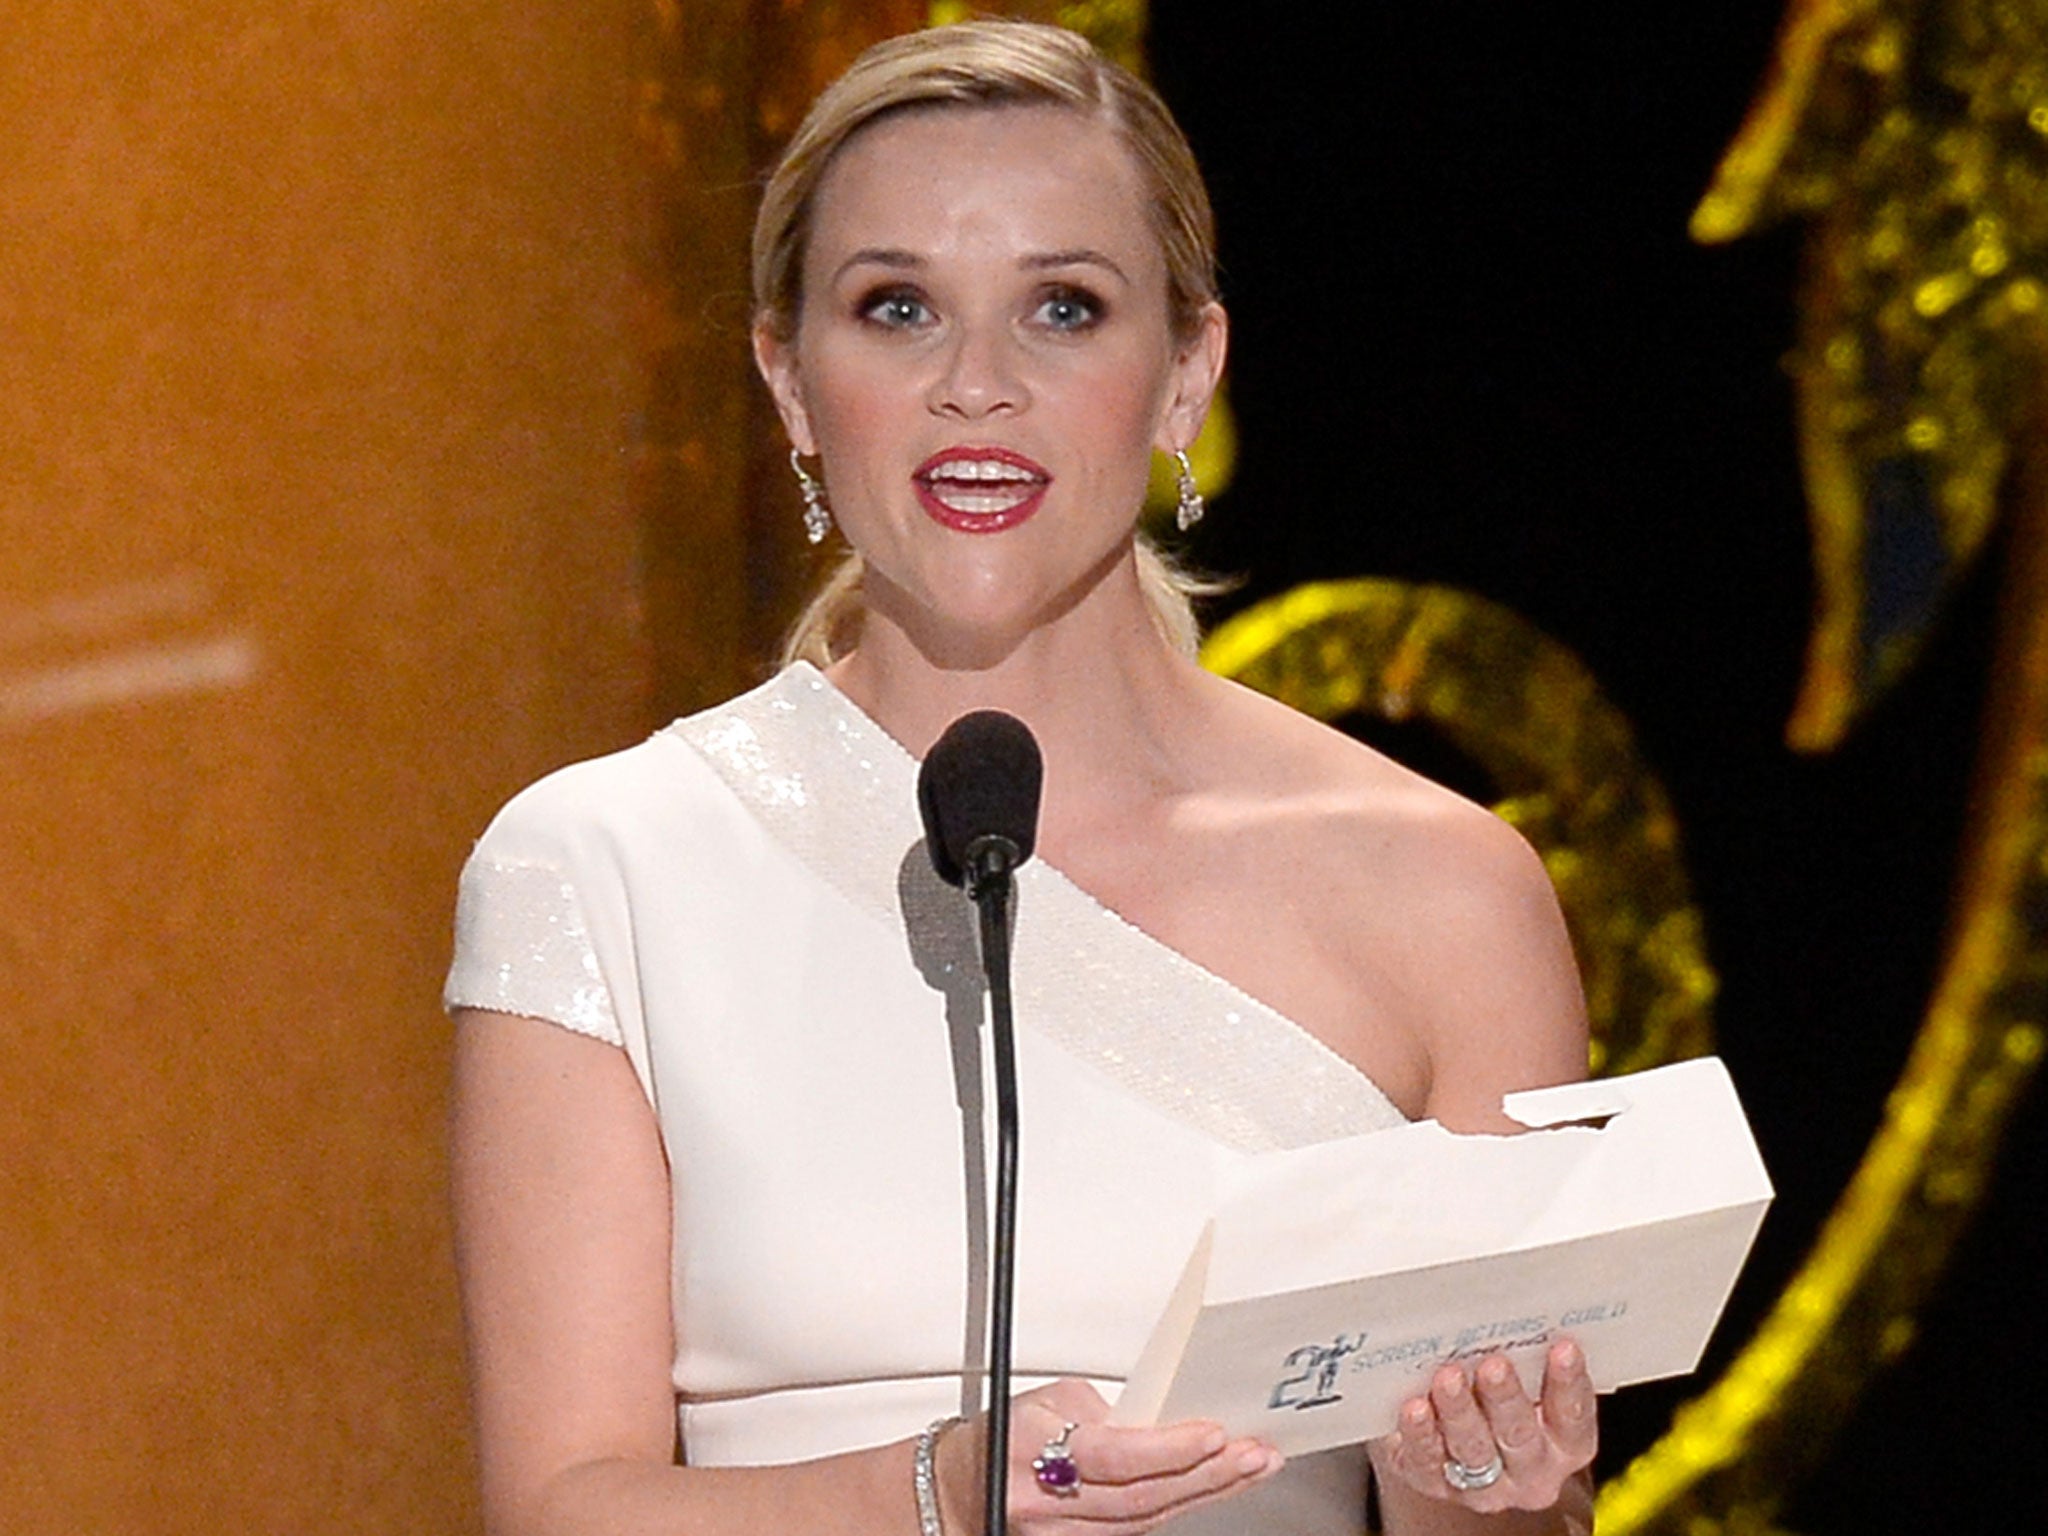 Actress Reese Witherspoon speaks onstage at the 2015 Annual Screen Actors Guild Awards.